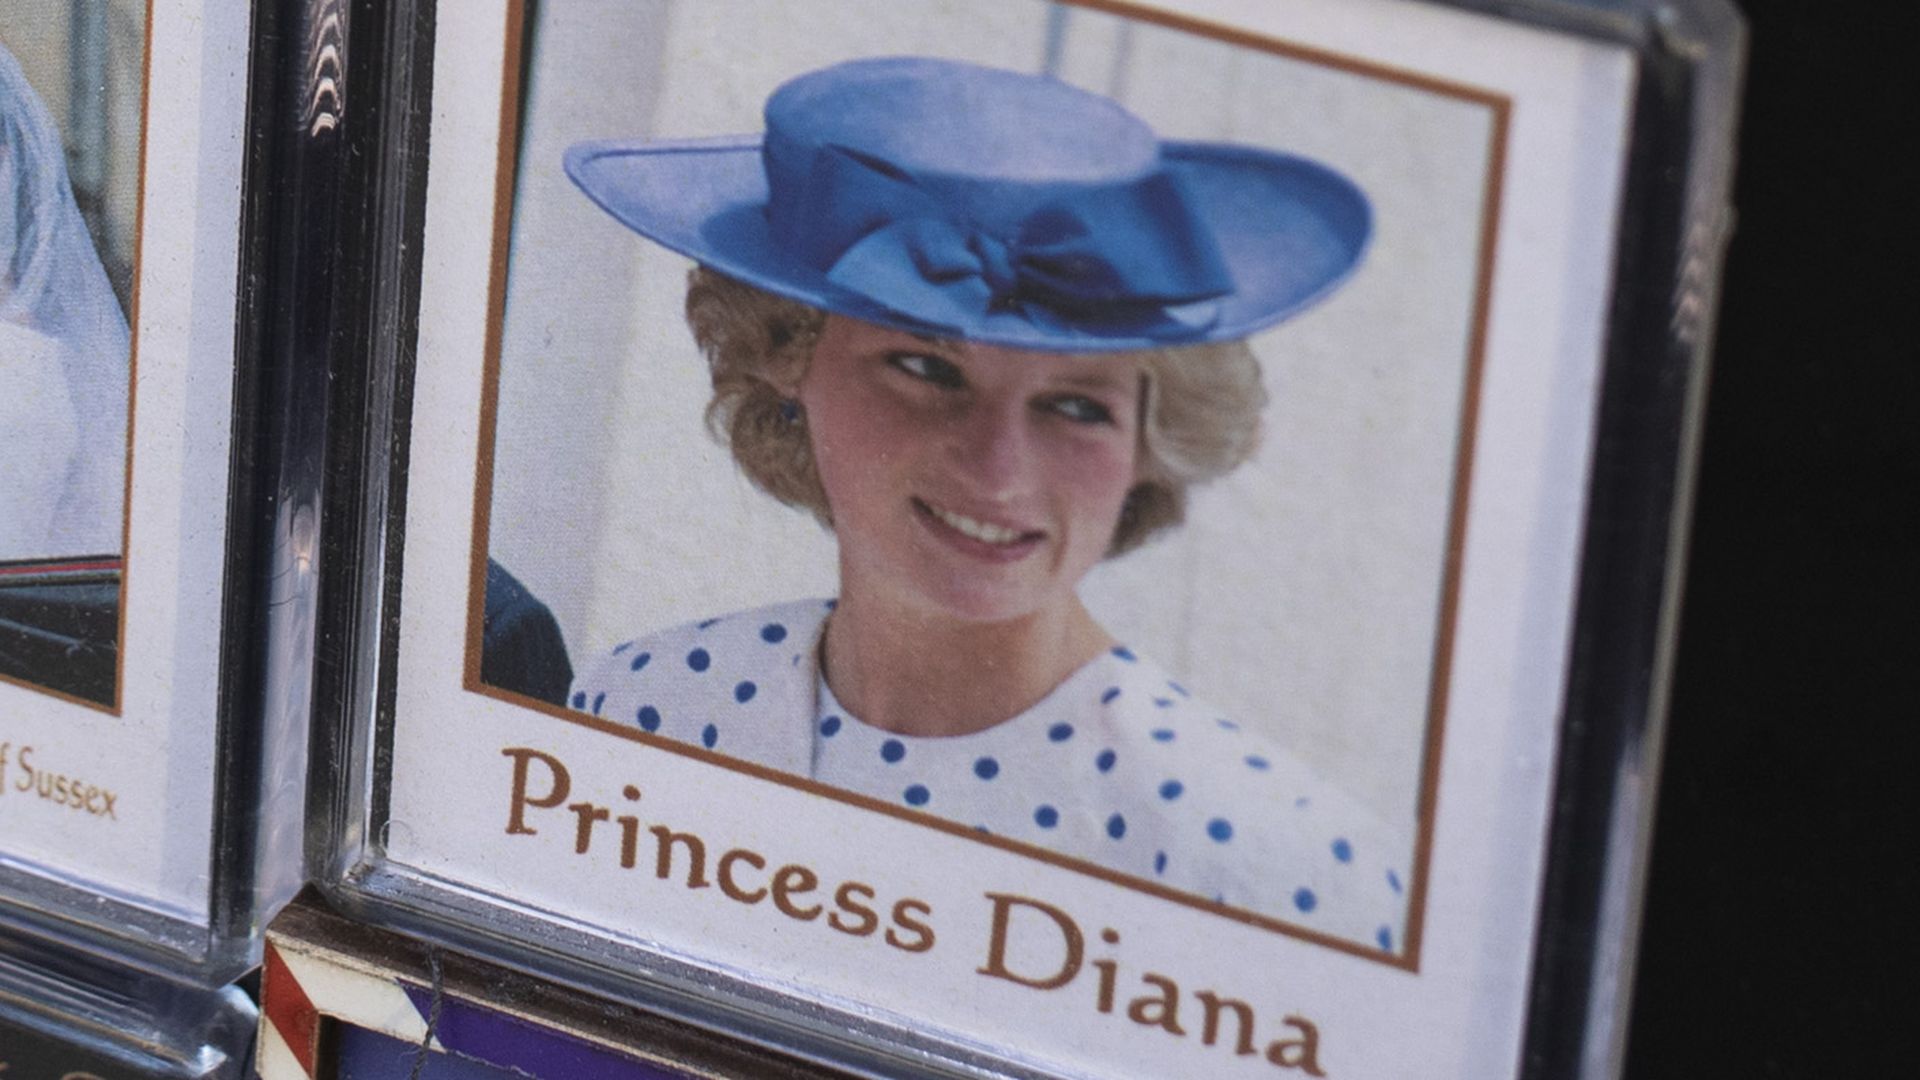 Images of Princess Diana on souvenirs in a shop in the U.K. in January 2020. 